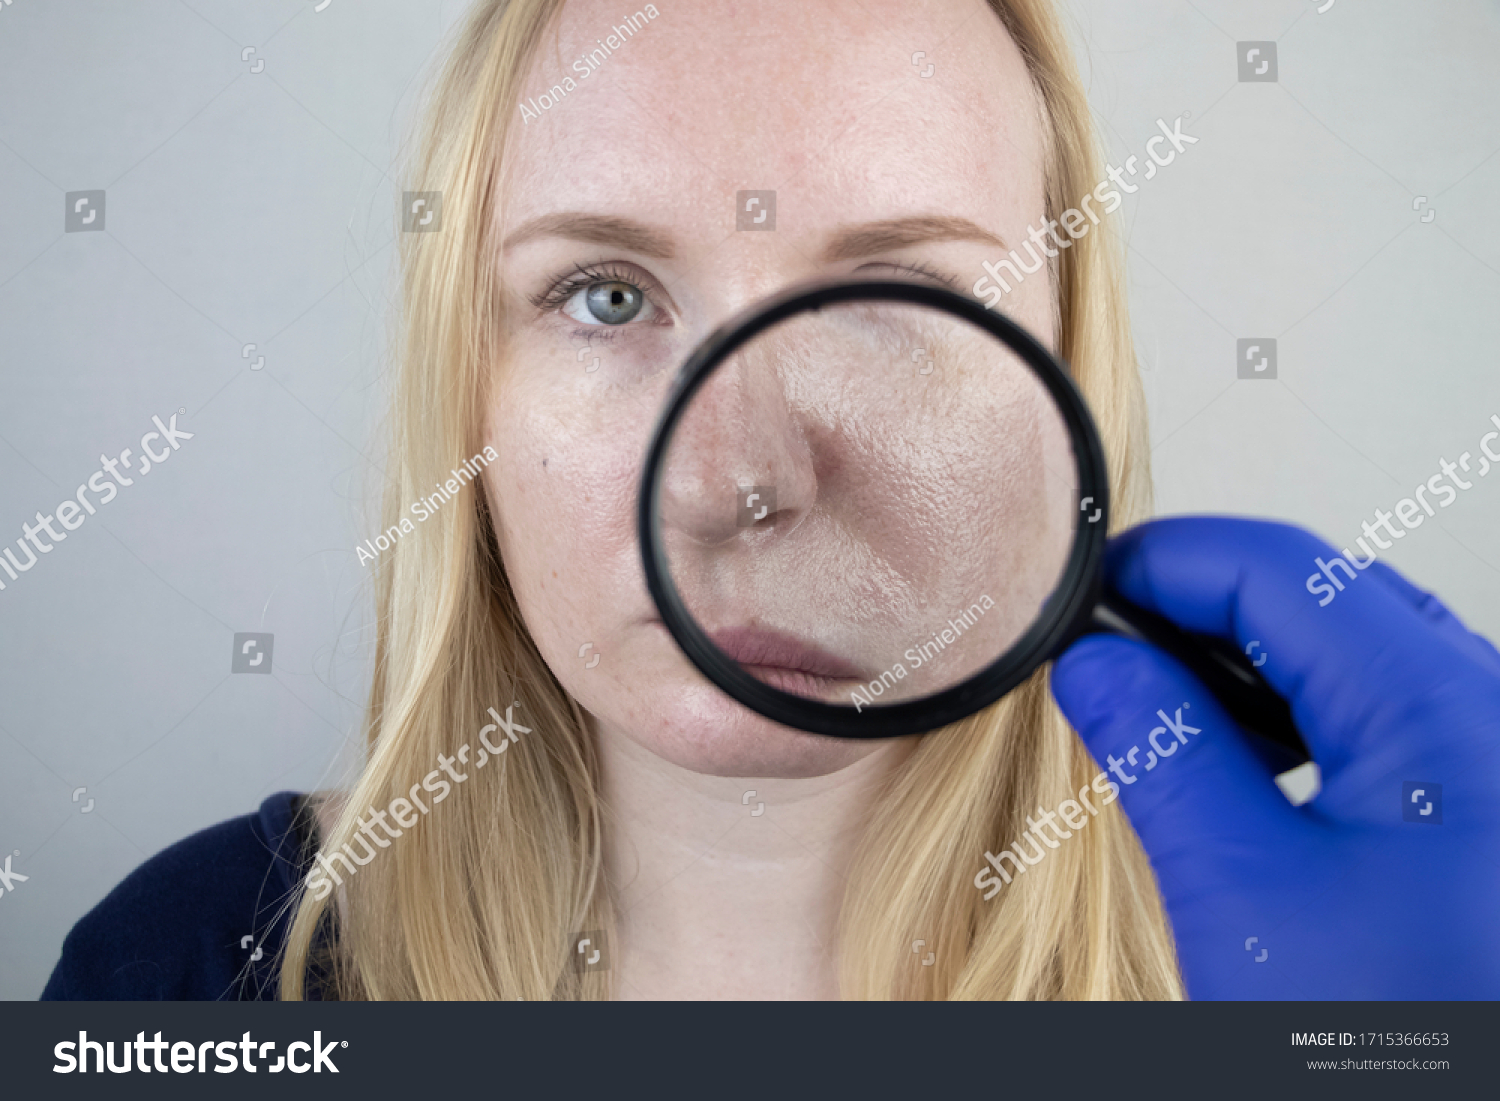 Oily and problem skin. Portrait of a blonde girl with acne, oily skin and pigmentation #1715366653